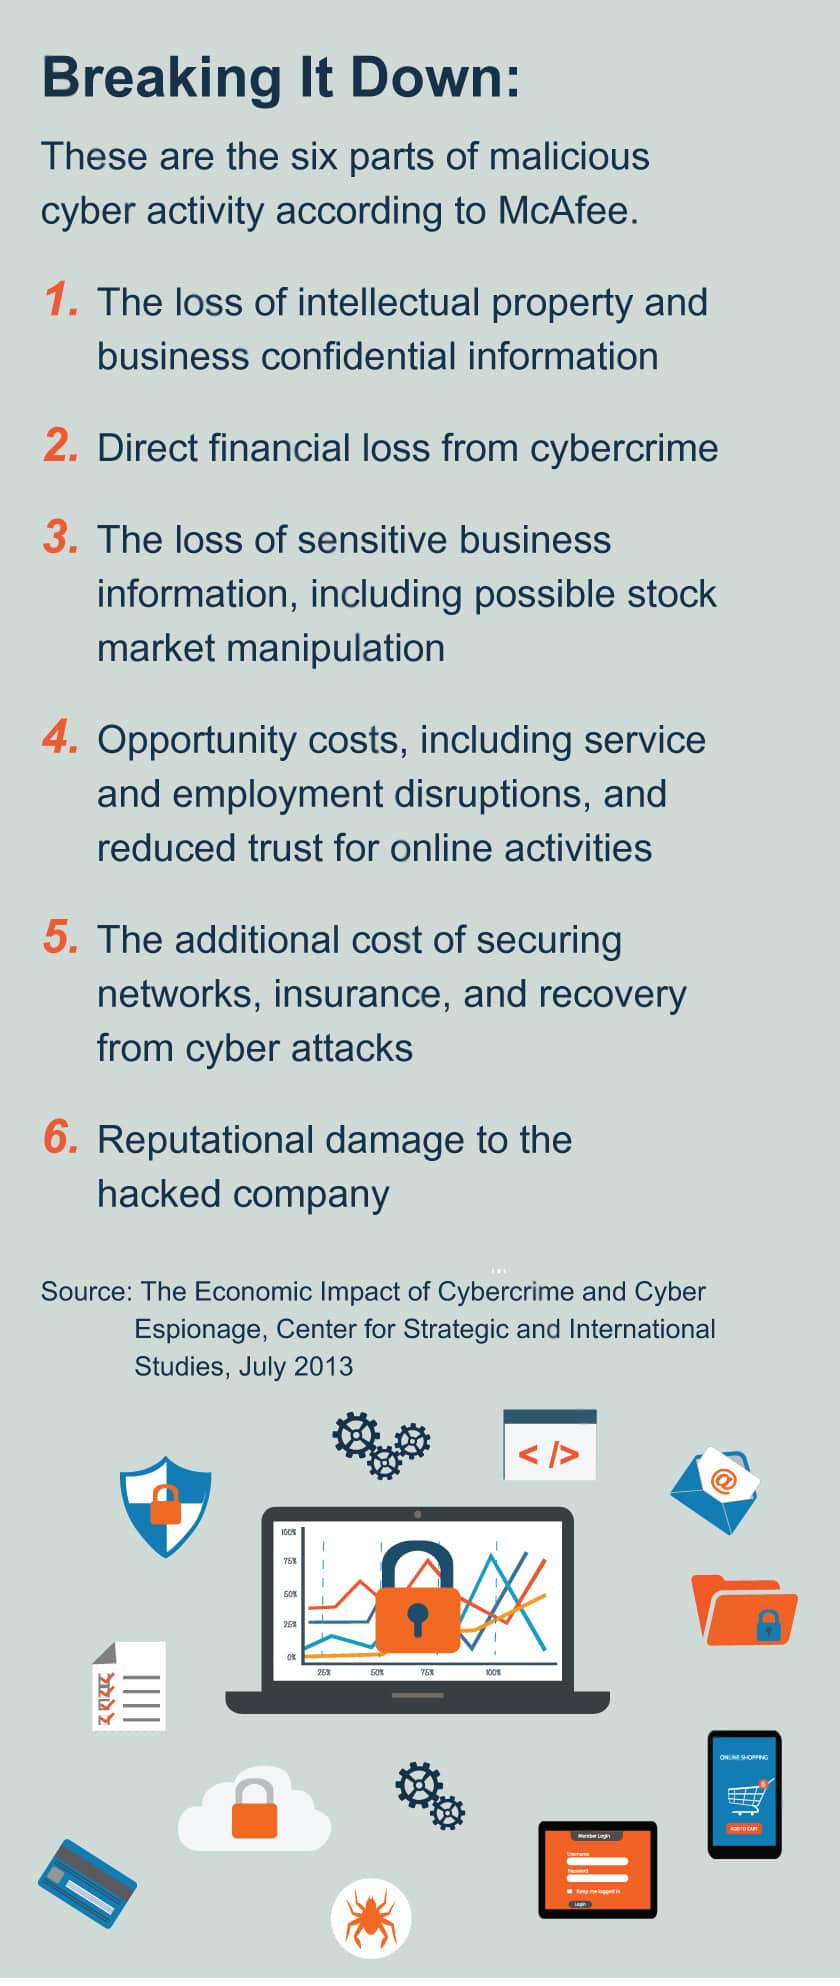 Breaking It Down: These are the six parts of malicious cyber activity according to McAfee. 1. The loss of intellectual property and business confidential information 2. Direct financial loss from cybercrime 3. The loss of sensitive business information, including possible stock market manipulation 4. Opportunity costs, including service and employment disruptions, and reduced trust for online activities 5. The additional cost of securing networks, insurance, and recovery from cyber attacks 6. Reputational damage to the hacked company